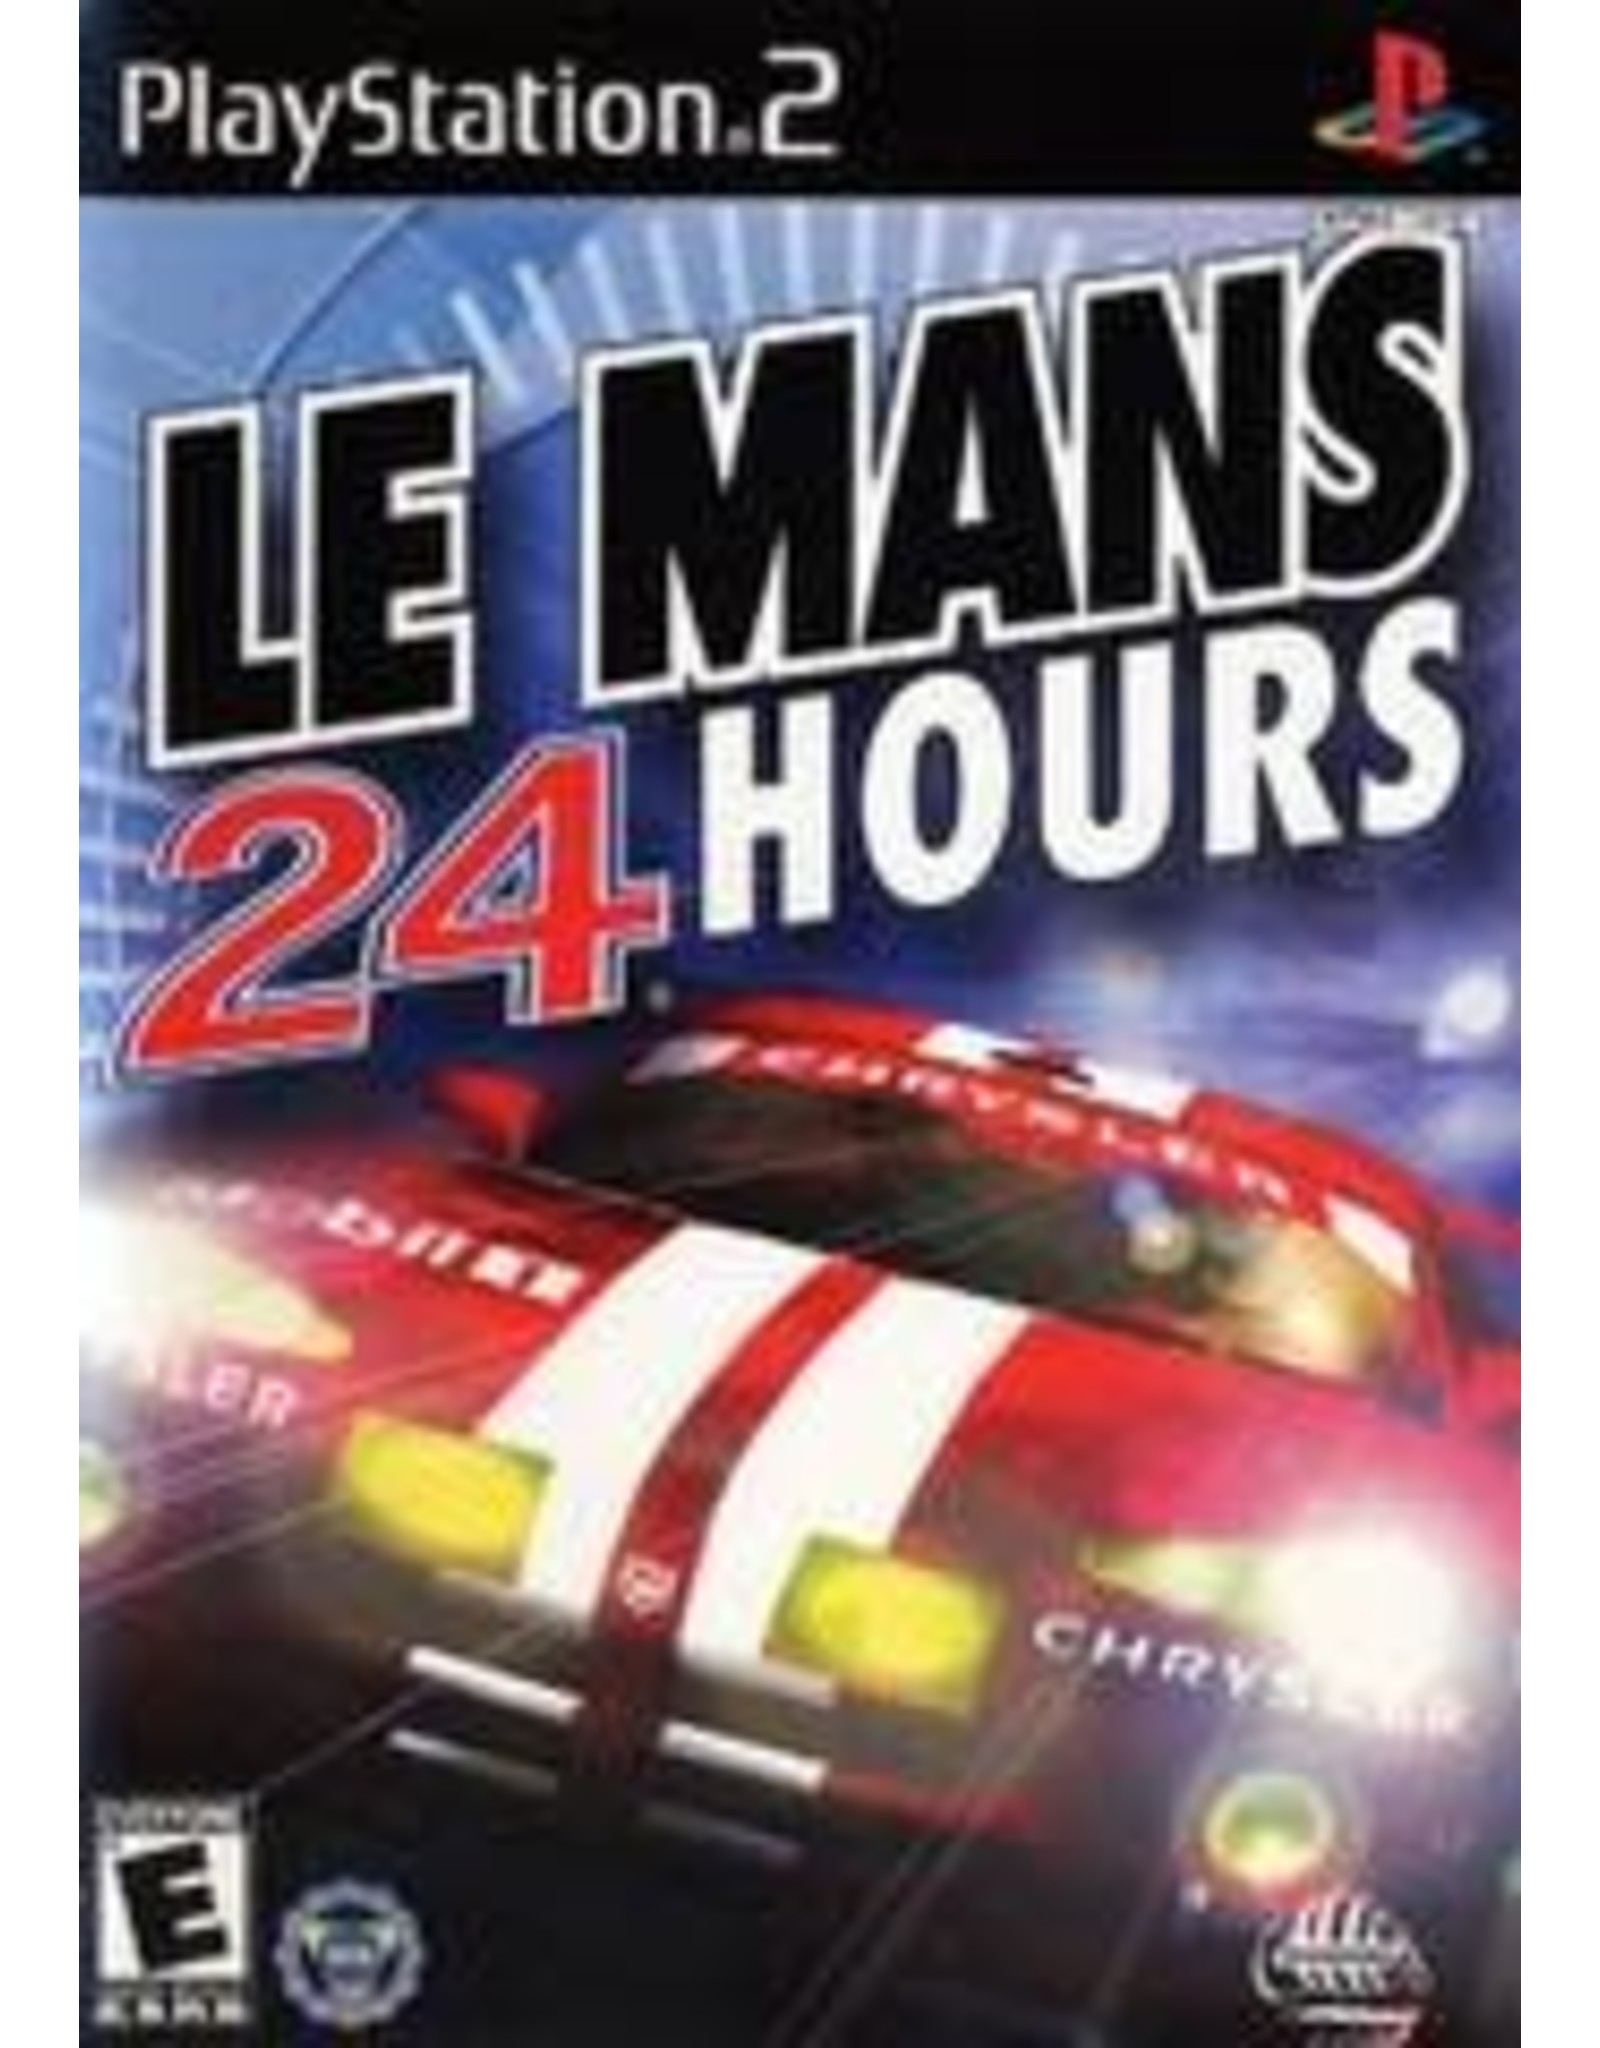 Playstation 2 Le Mans 24 Hours (CiB, Sticker On Manual)